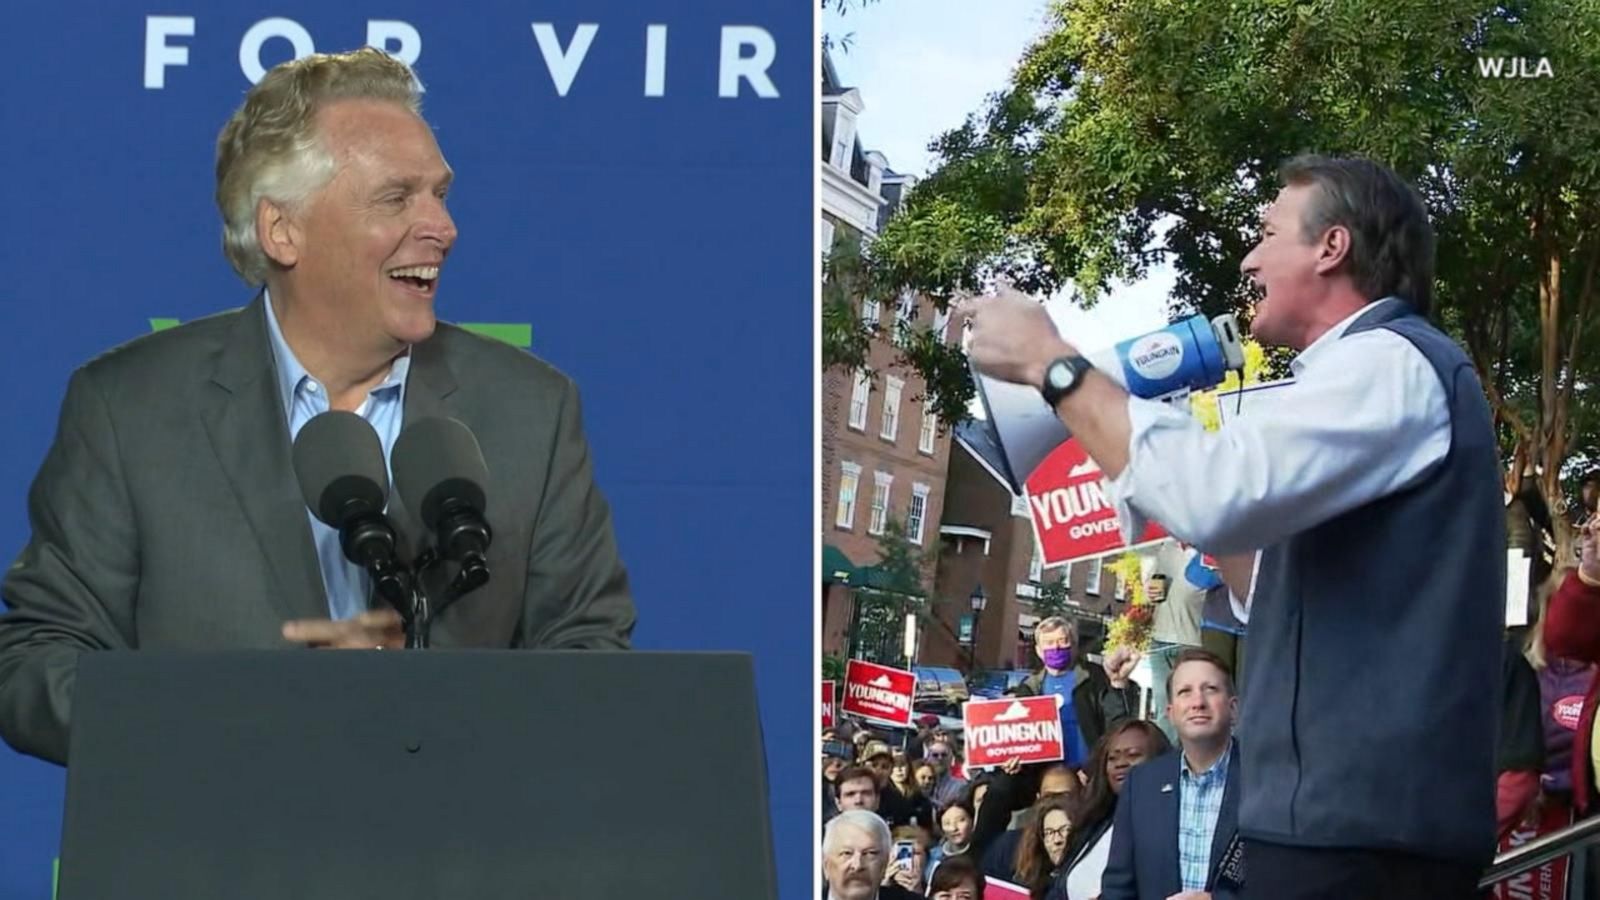 Virginia governor race offers glimpse at highstakes of 2022 midterms